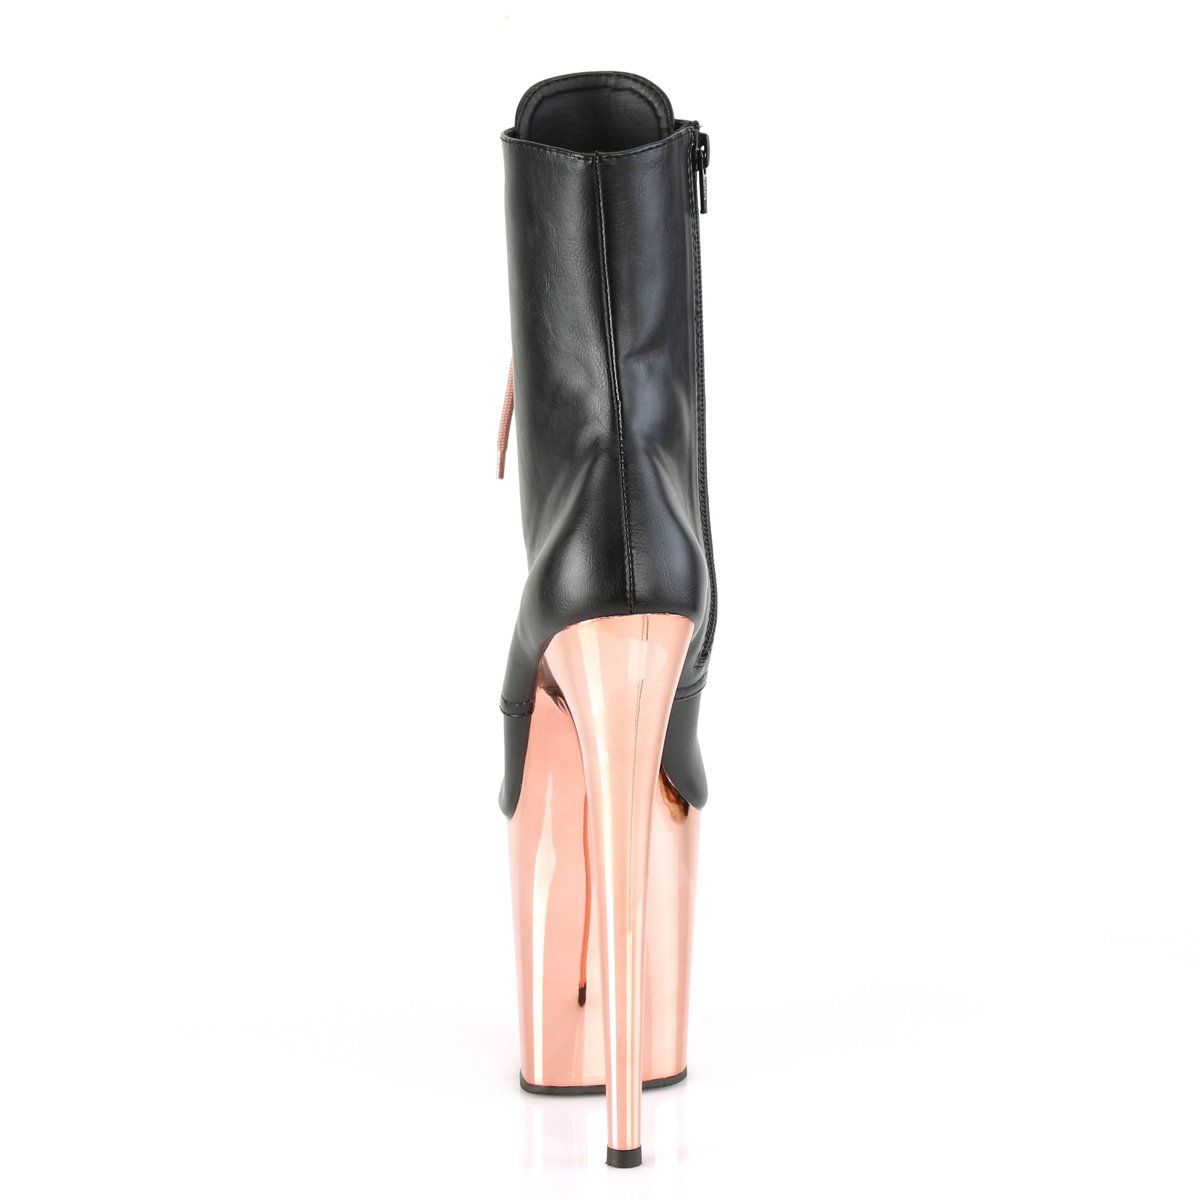 FLAMINGO-1020 Black Faux Leather/Rose Gold Chrome Ankle Boot Pleaser